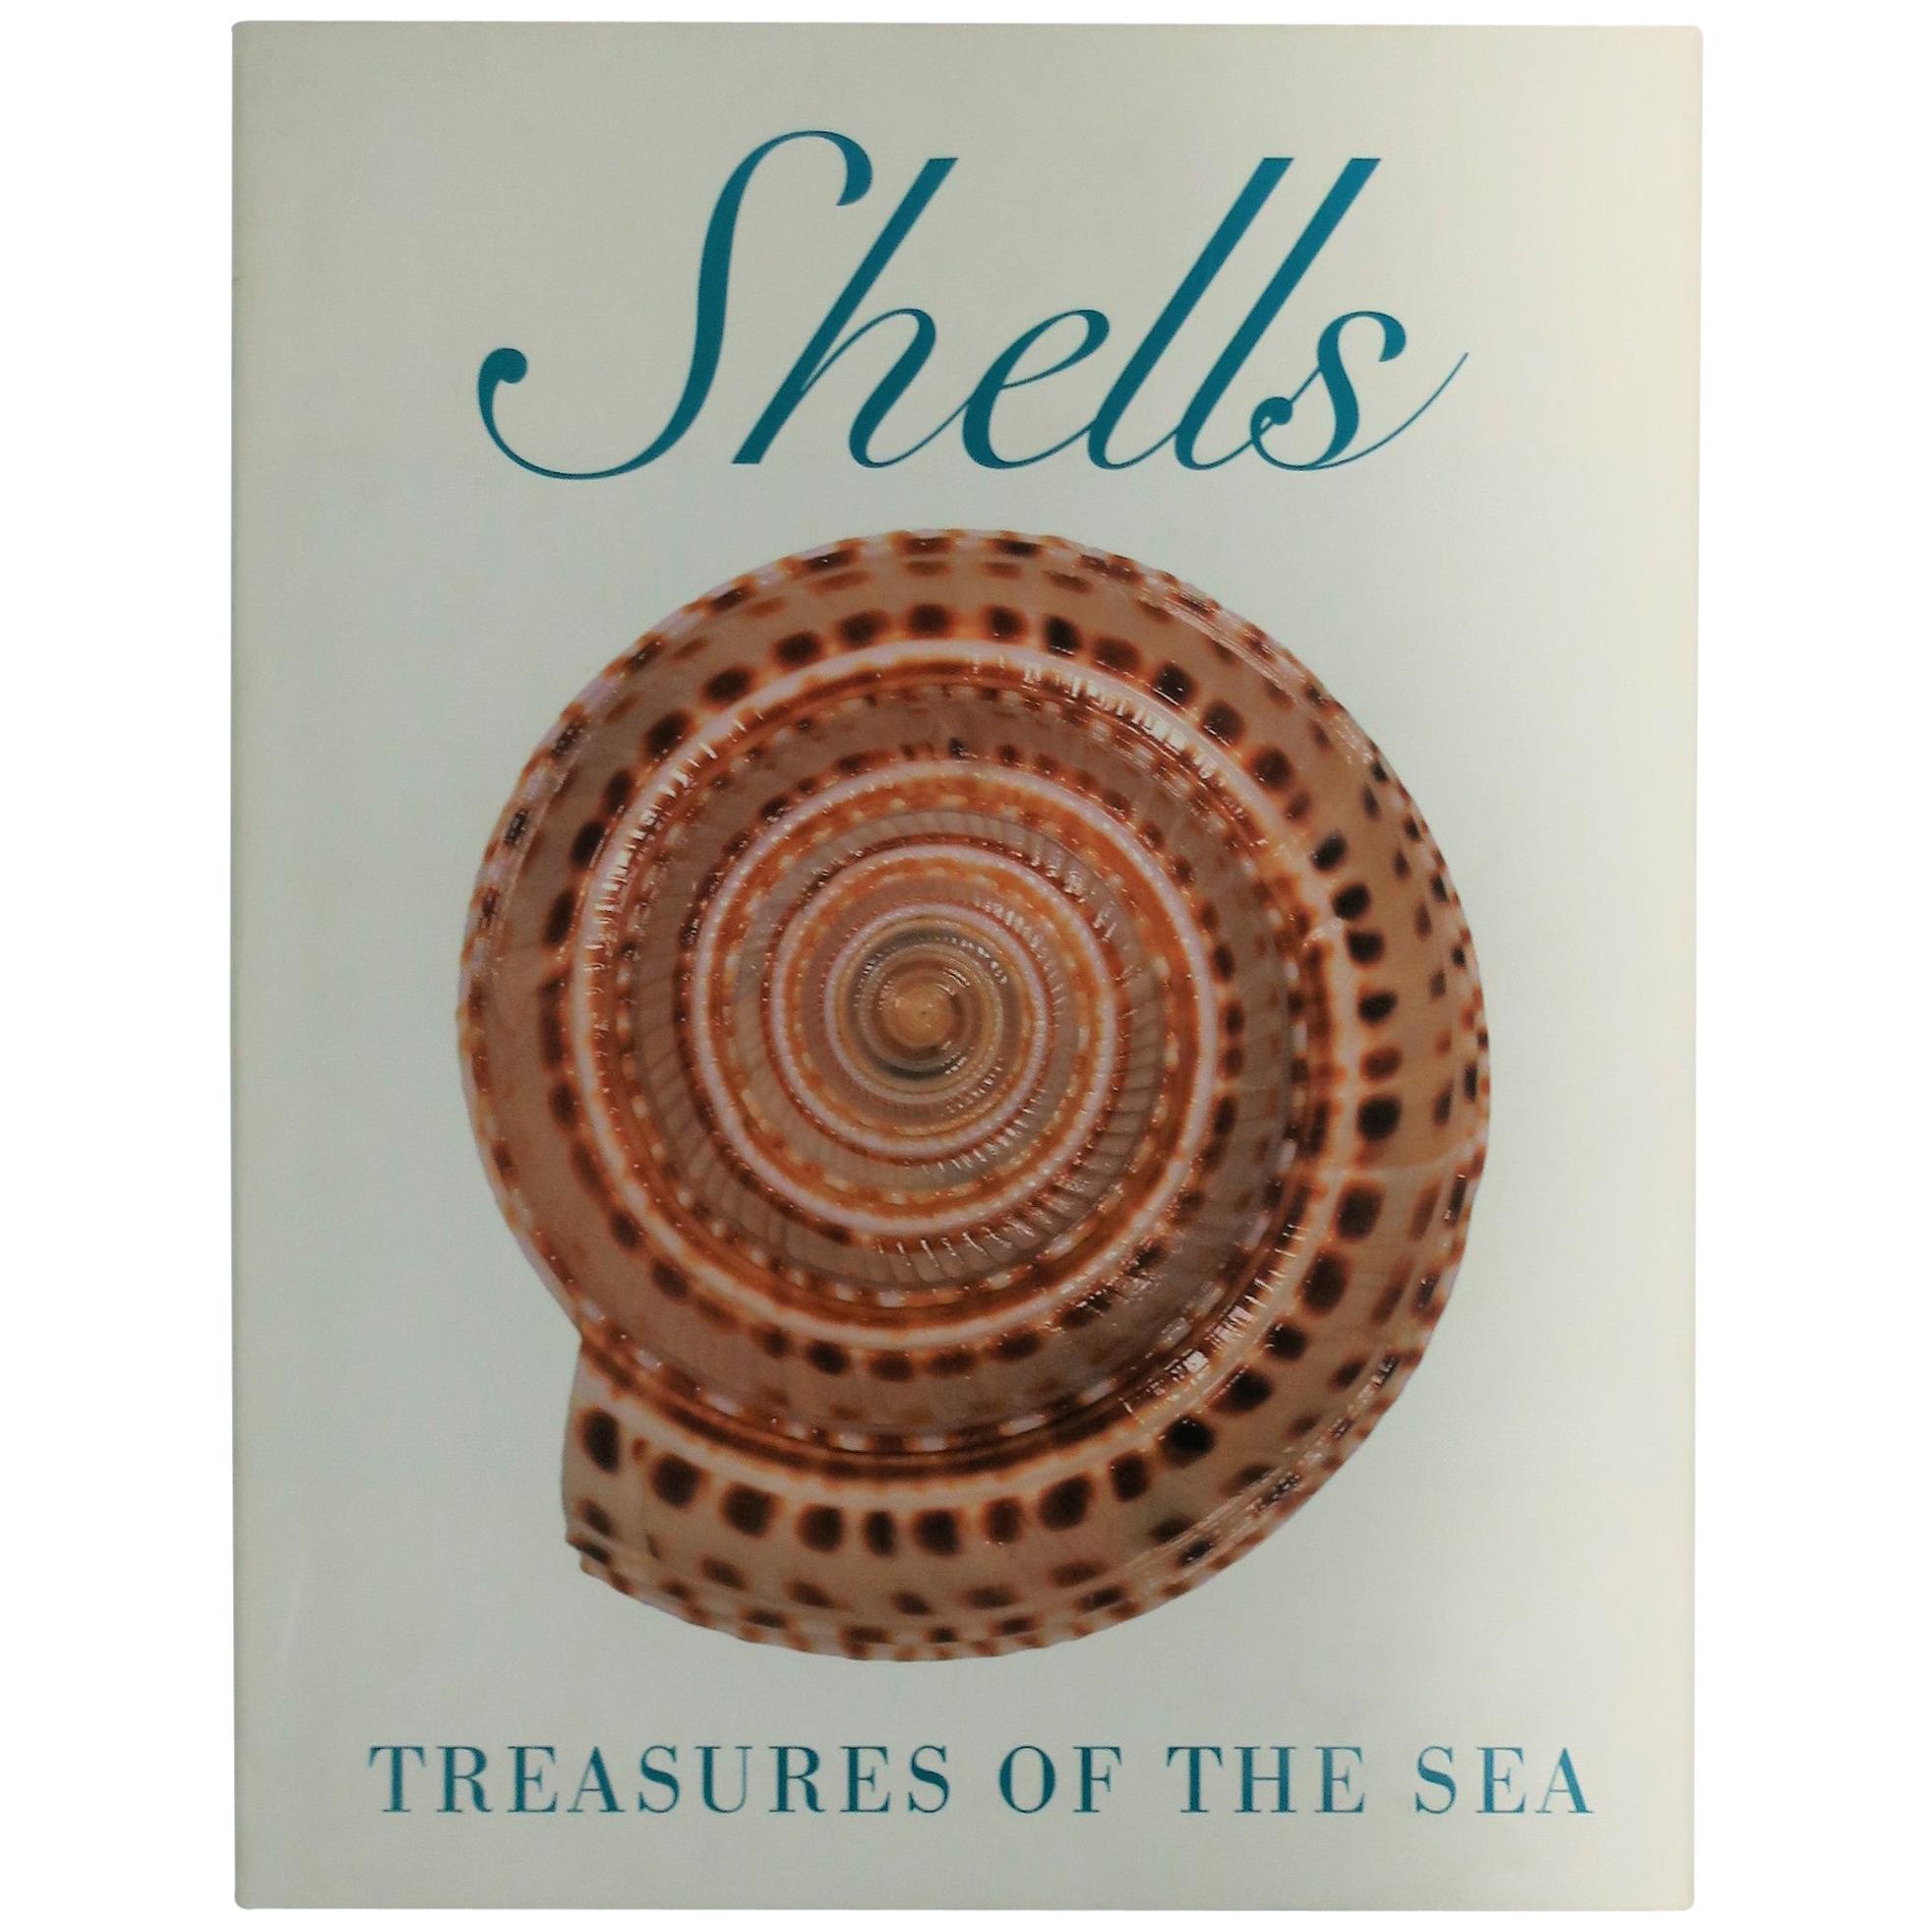 Shells 'Treasures of the Sea' Sea Shell Library or Coffee Table Book, ca. 1990s